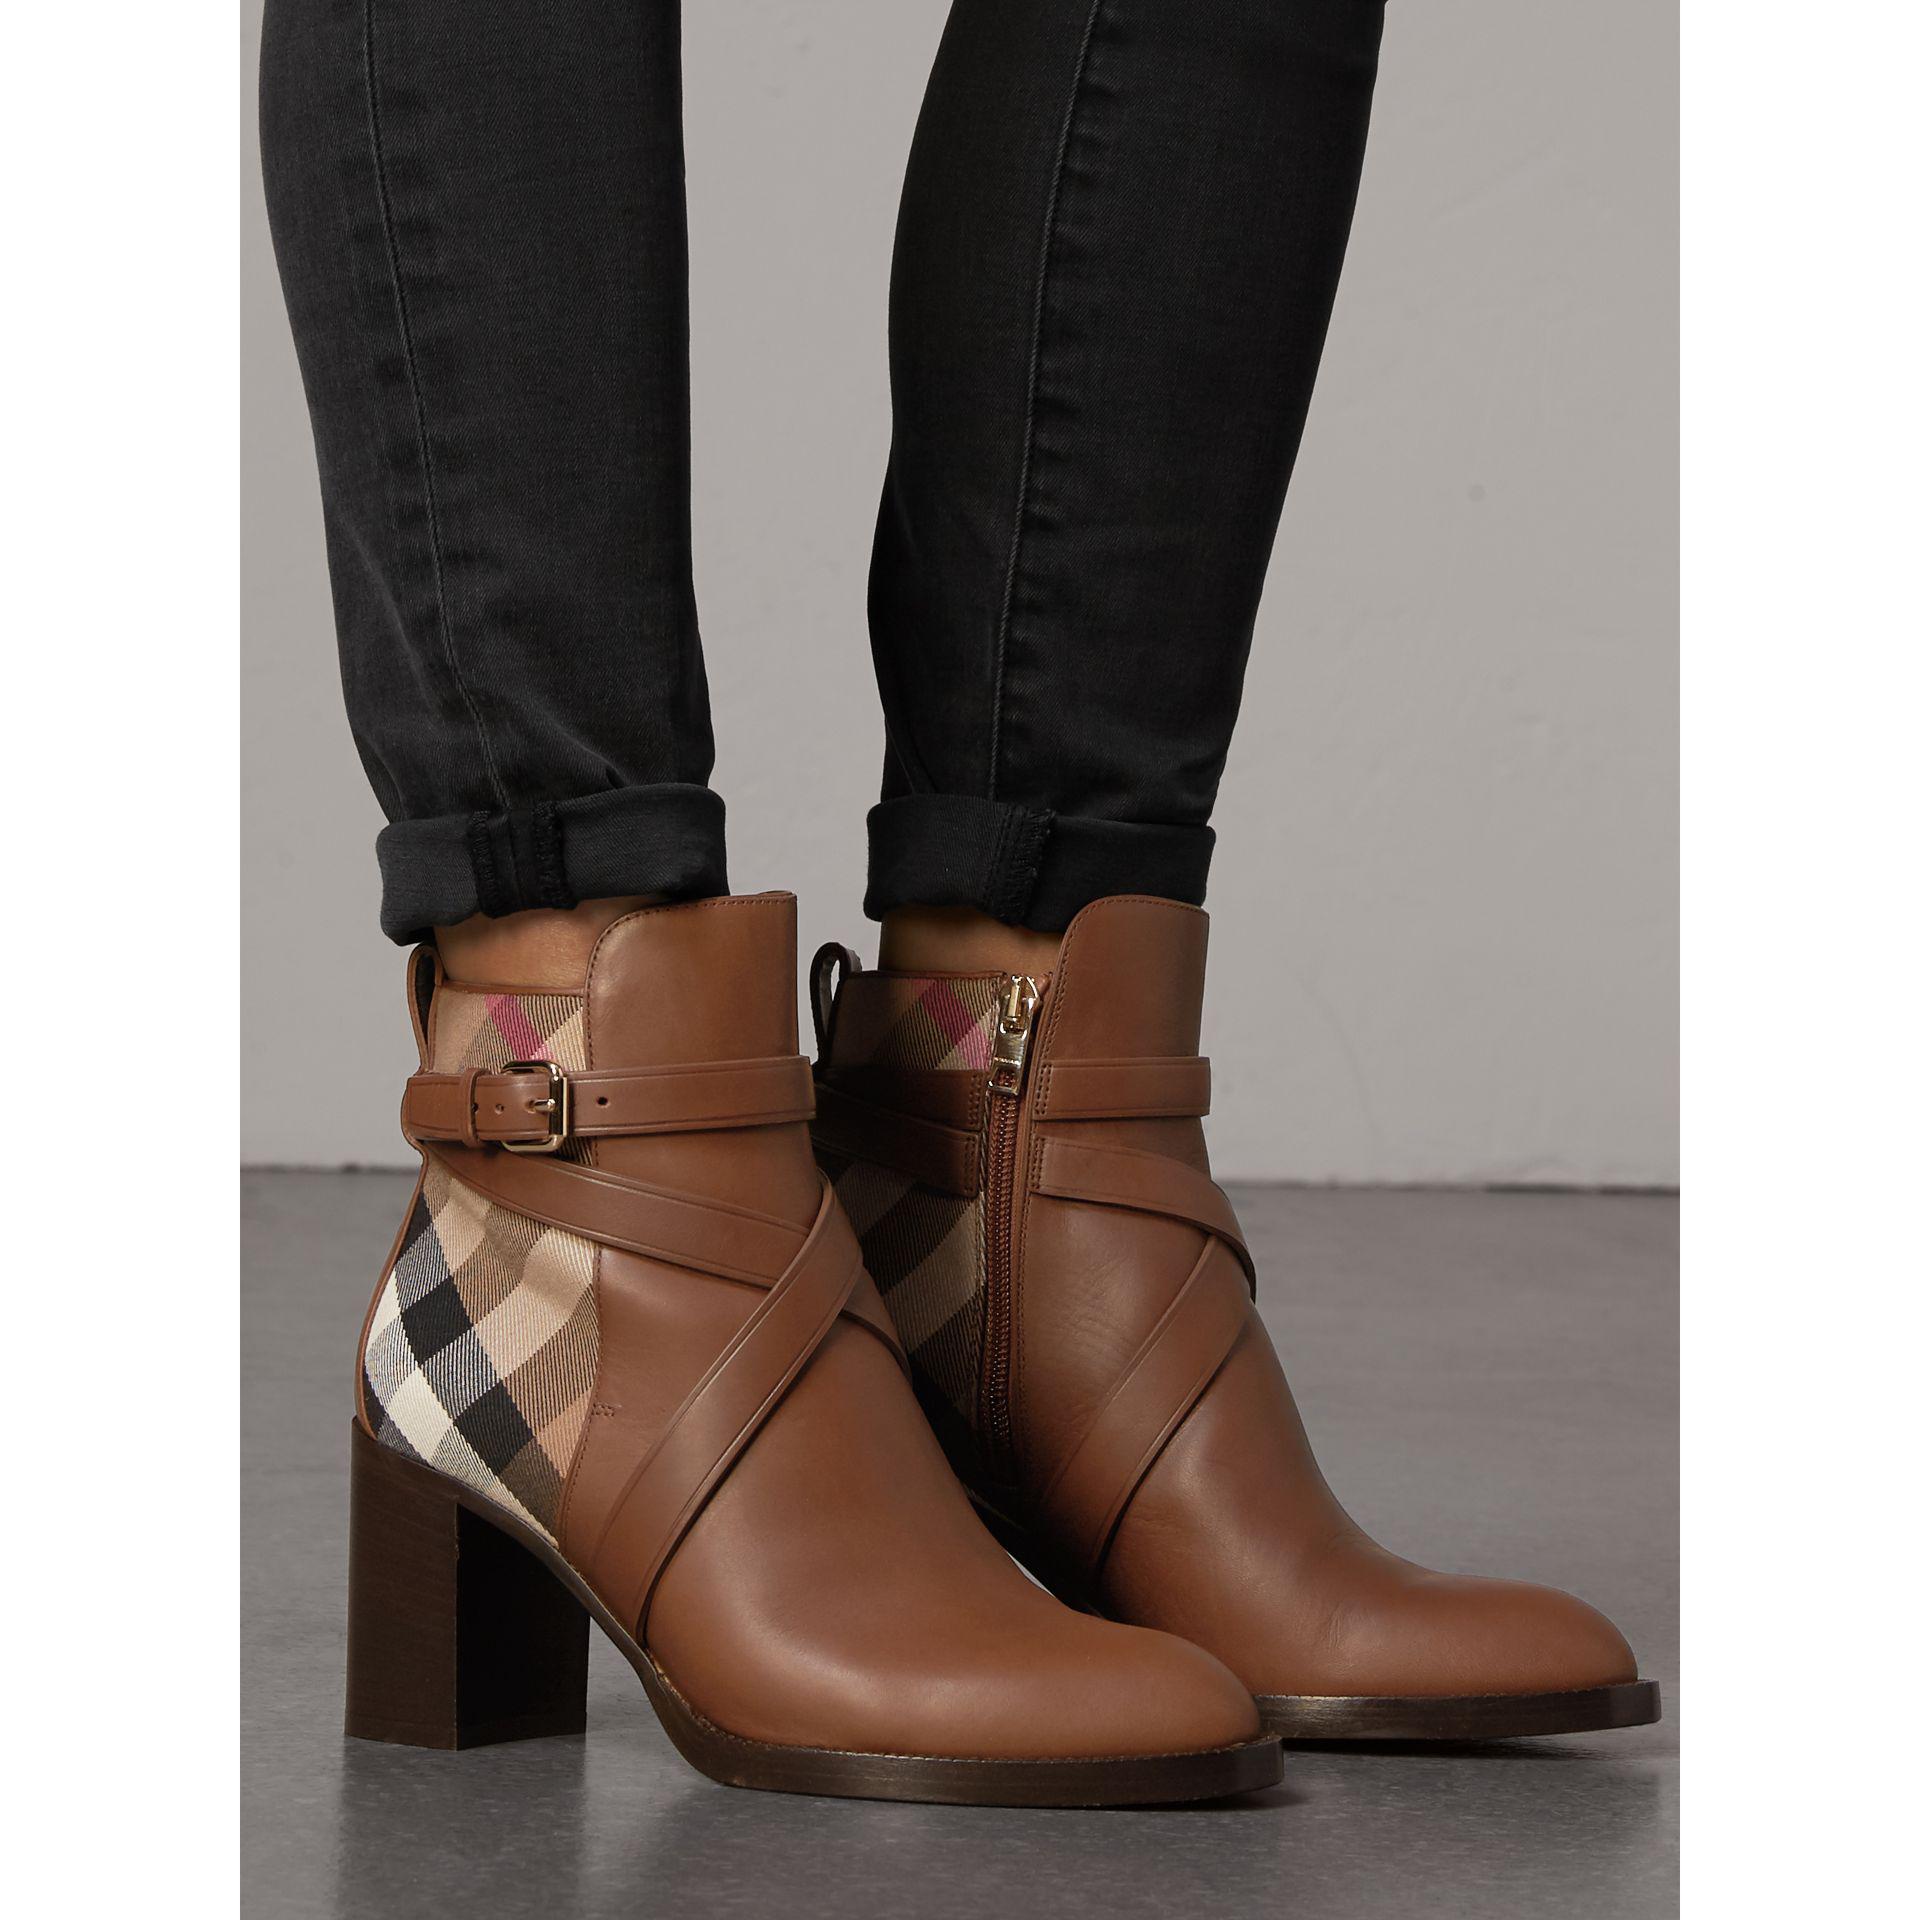 Introducir 53+ imagen burberry brown leather boots